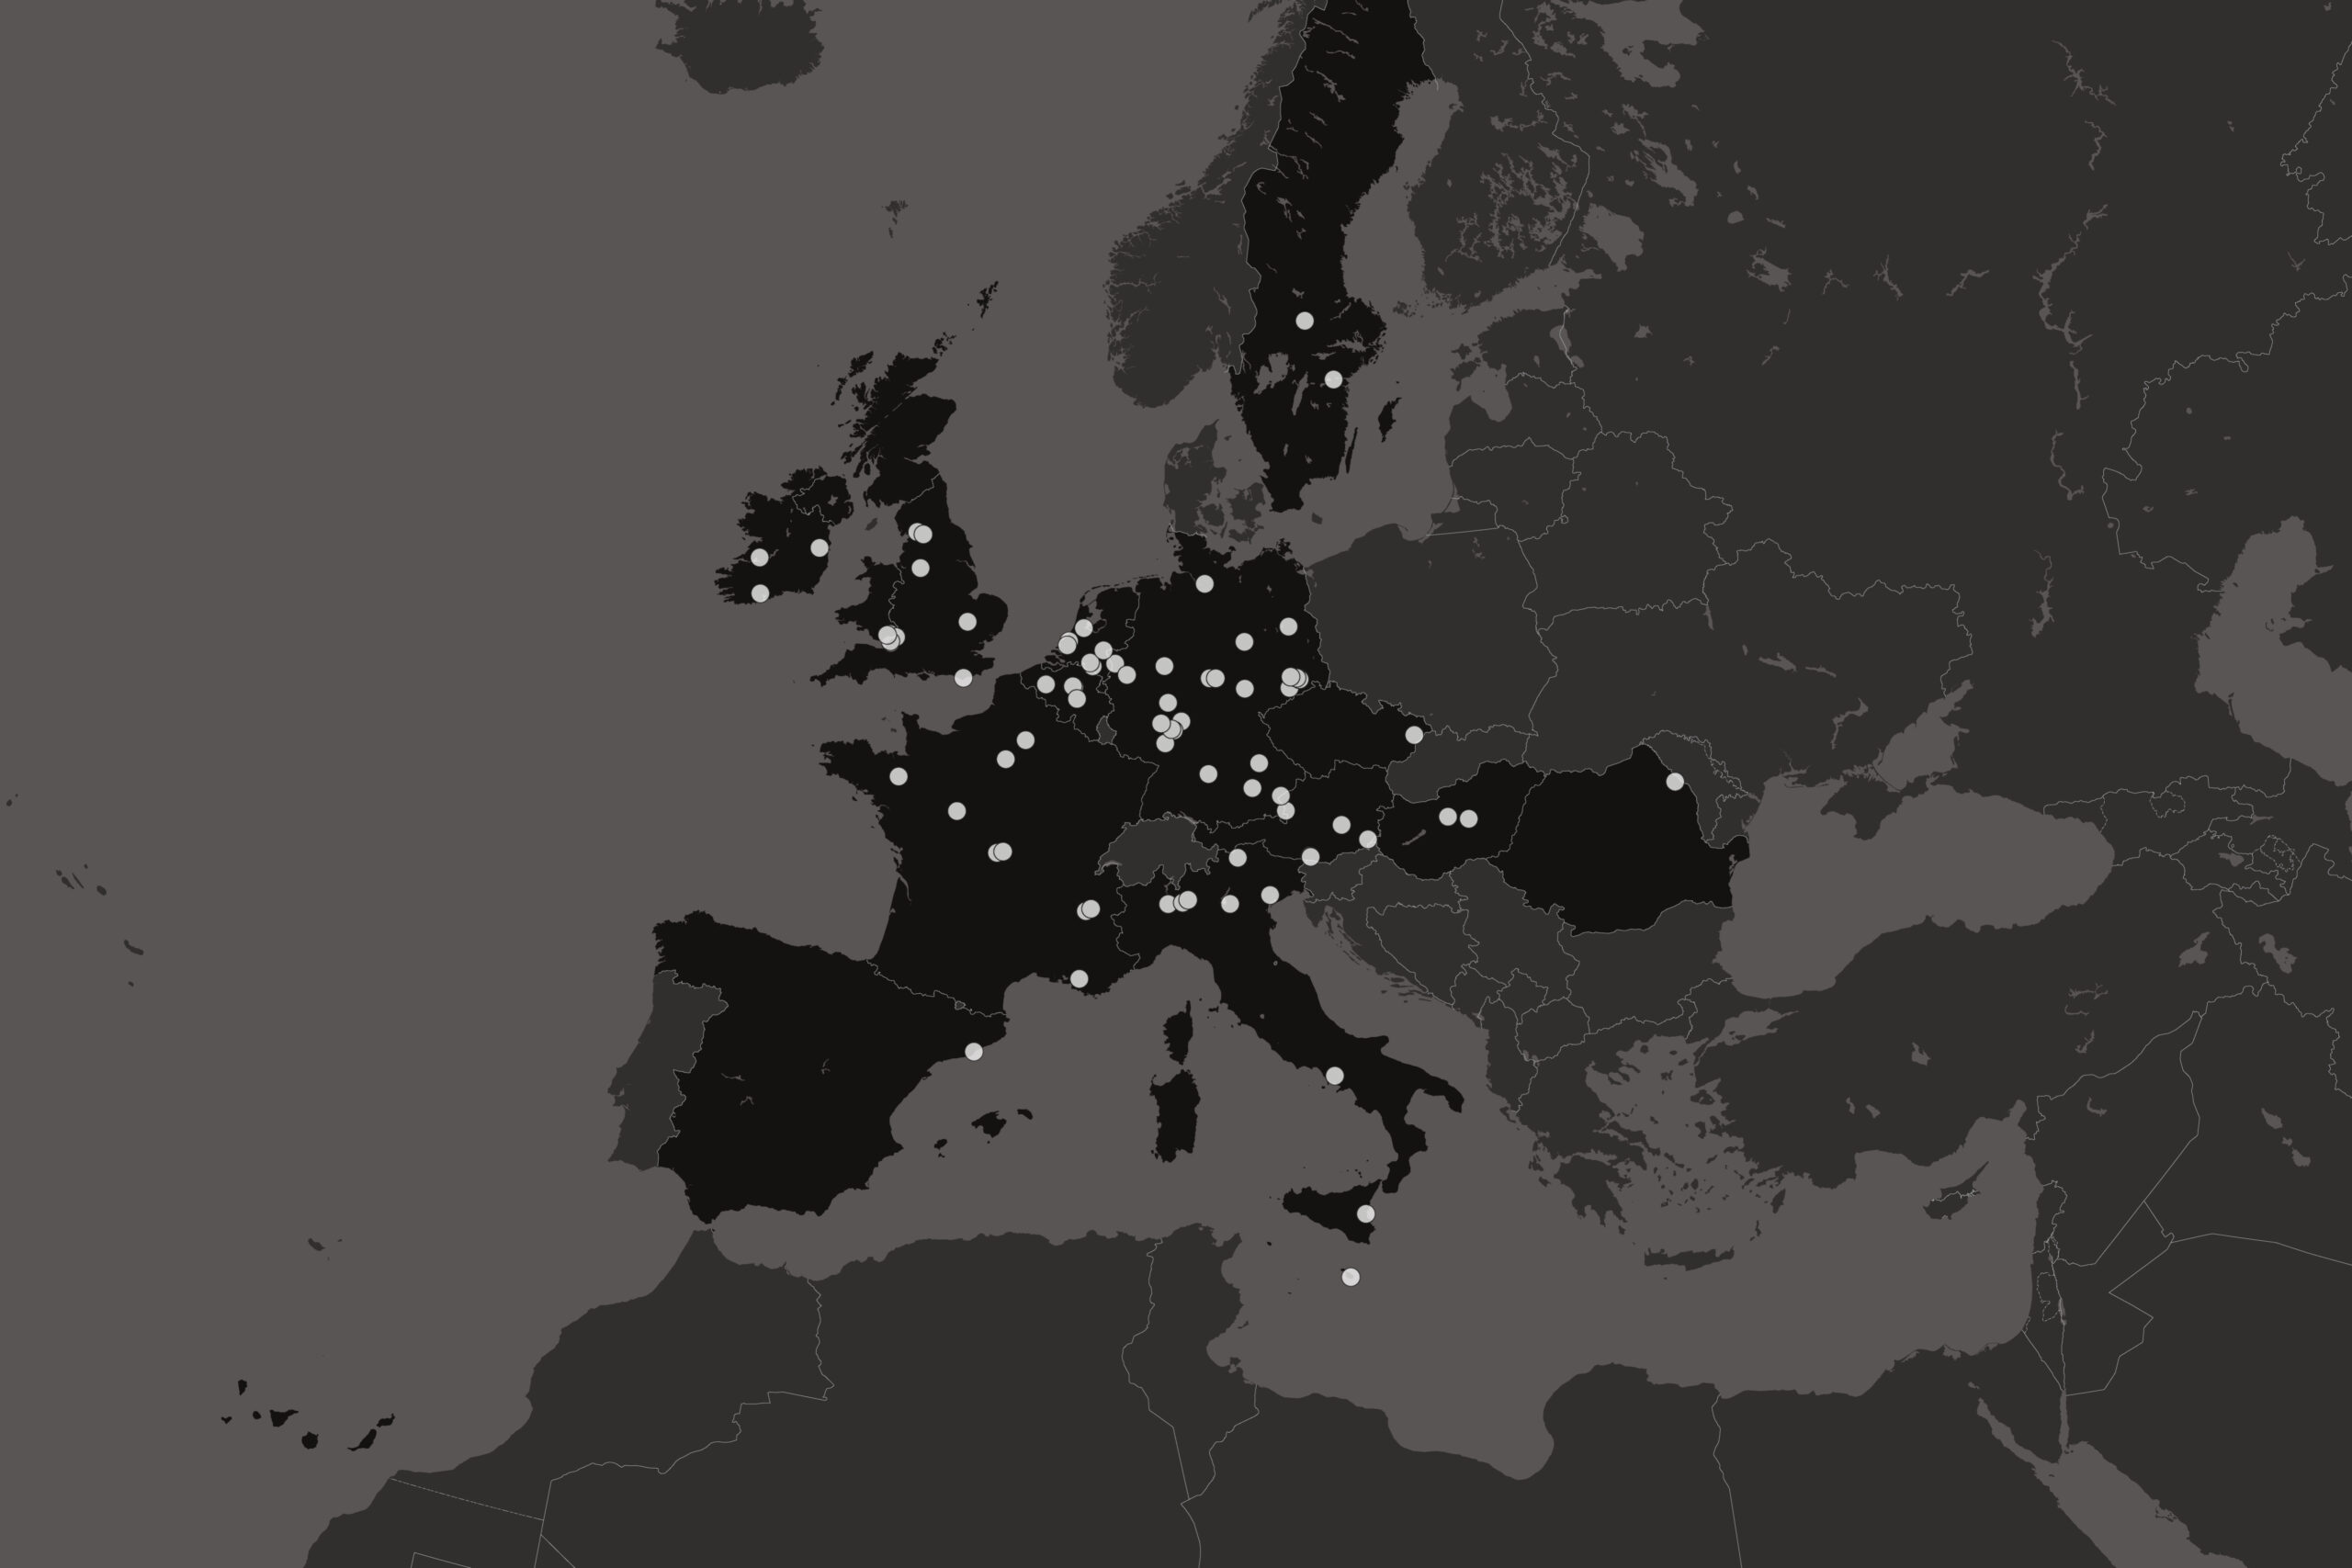 A map of semiconductor supply chain locations which covers much of Europe